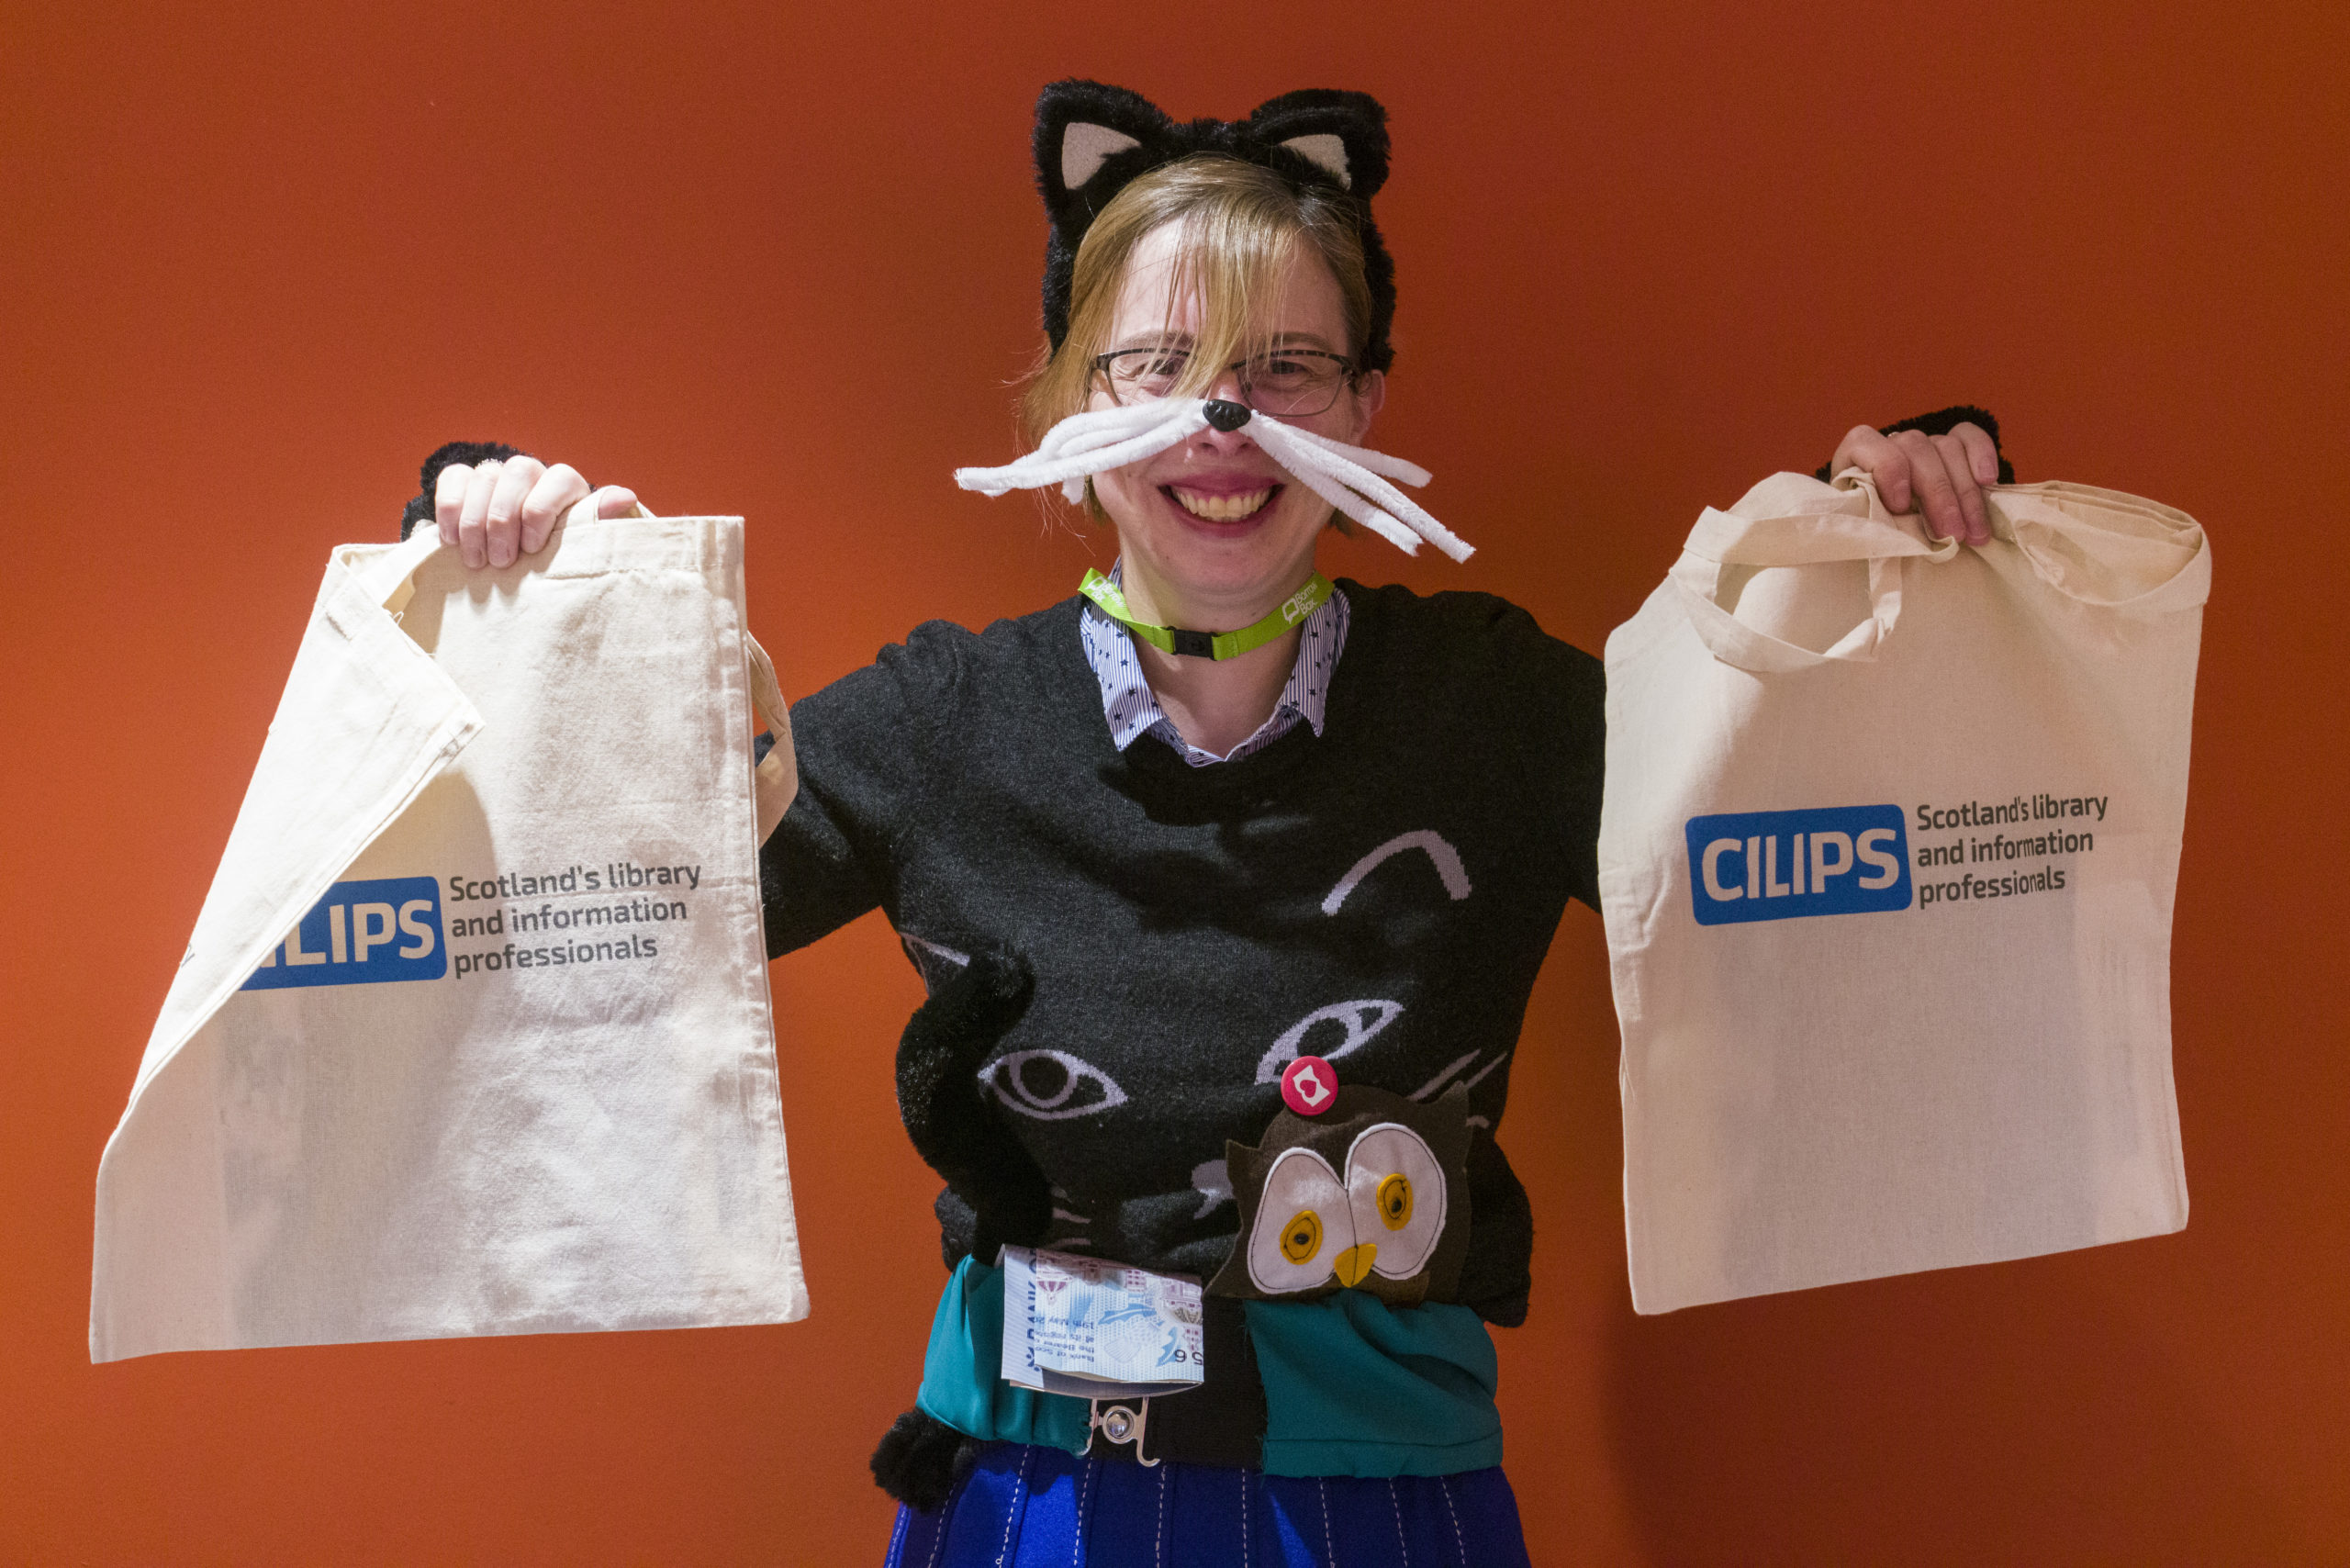 Conference delegate holds up two CILIPS Tote bags